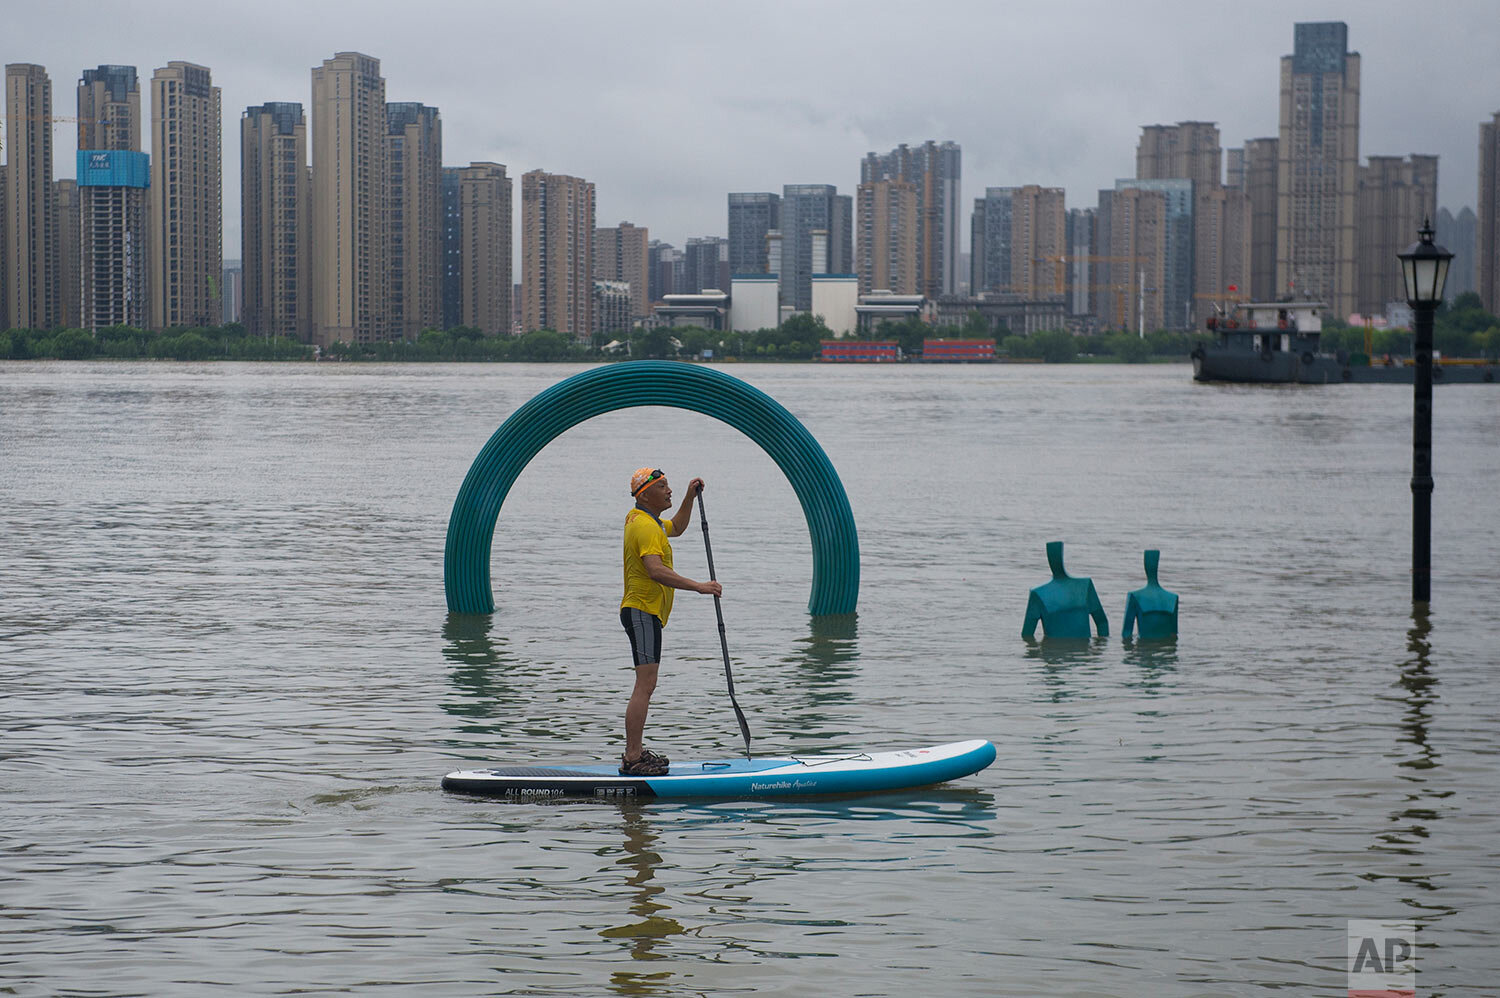  A man paddles by a sculpture submerged by floodwaters along the riverside park in Wuhan in central China's Hubei province Sunday, July 5, 2020.  (Chinatopix via AP) 